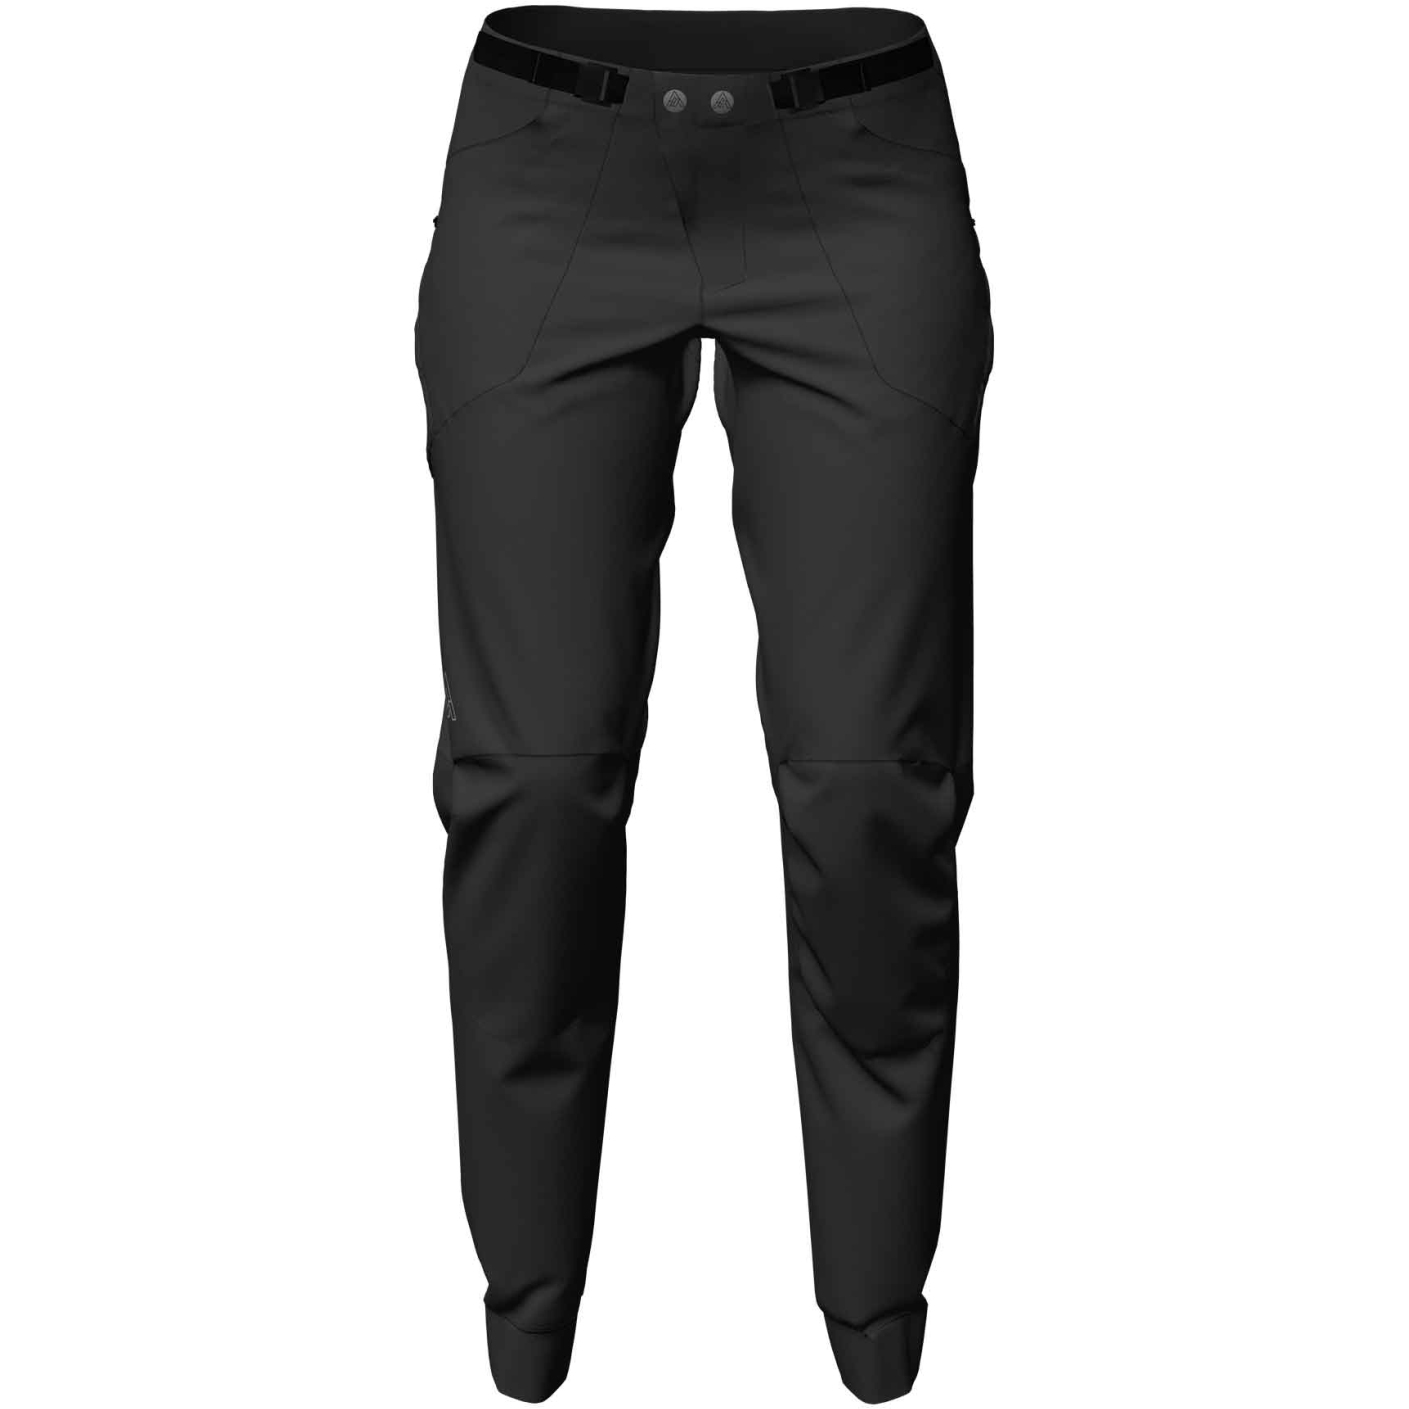 Picture of 7mesh Glidepath Pants Women - Black